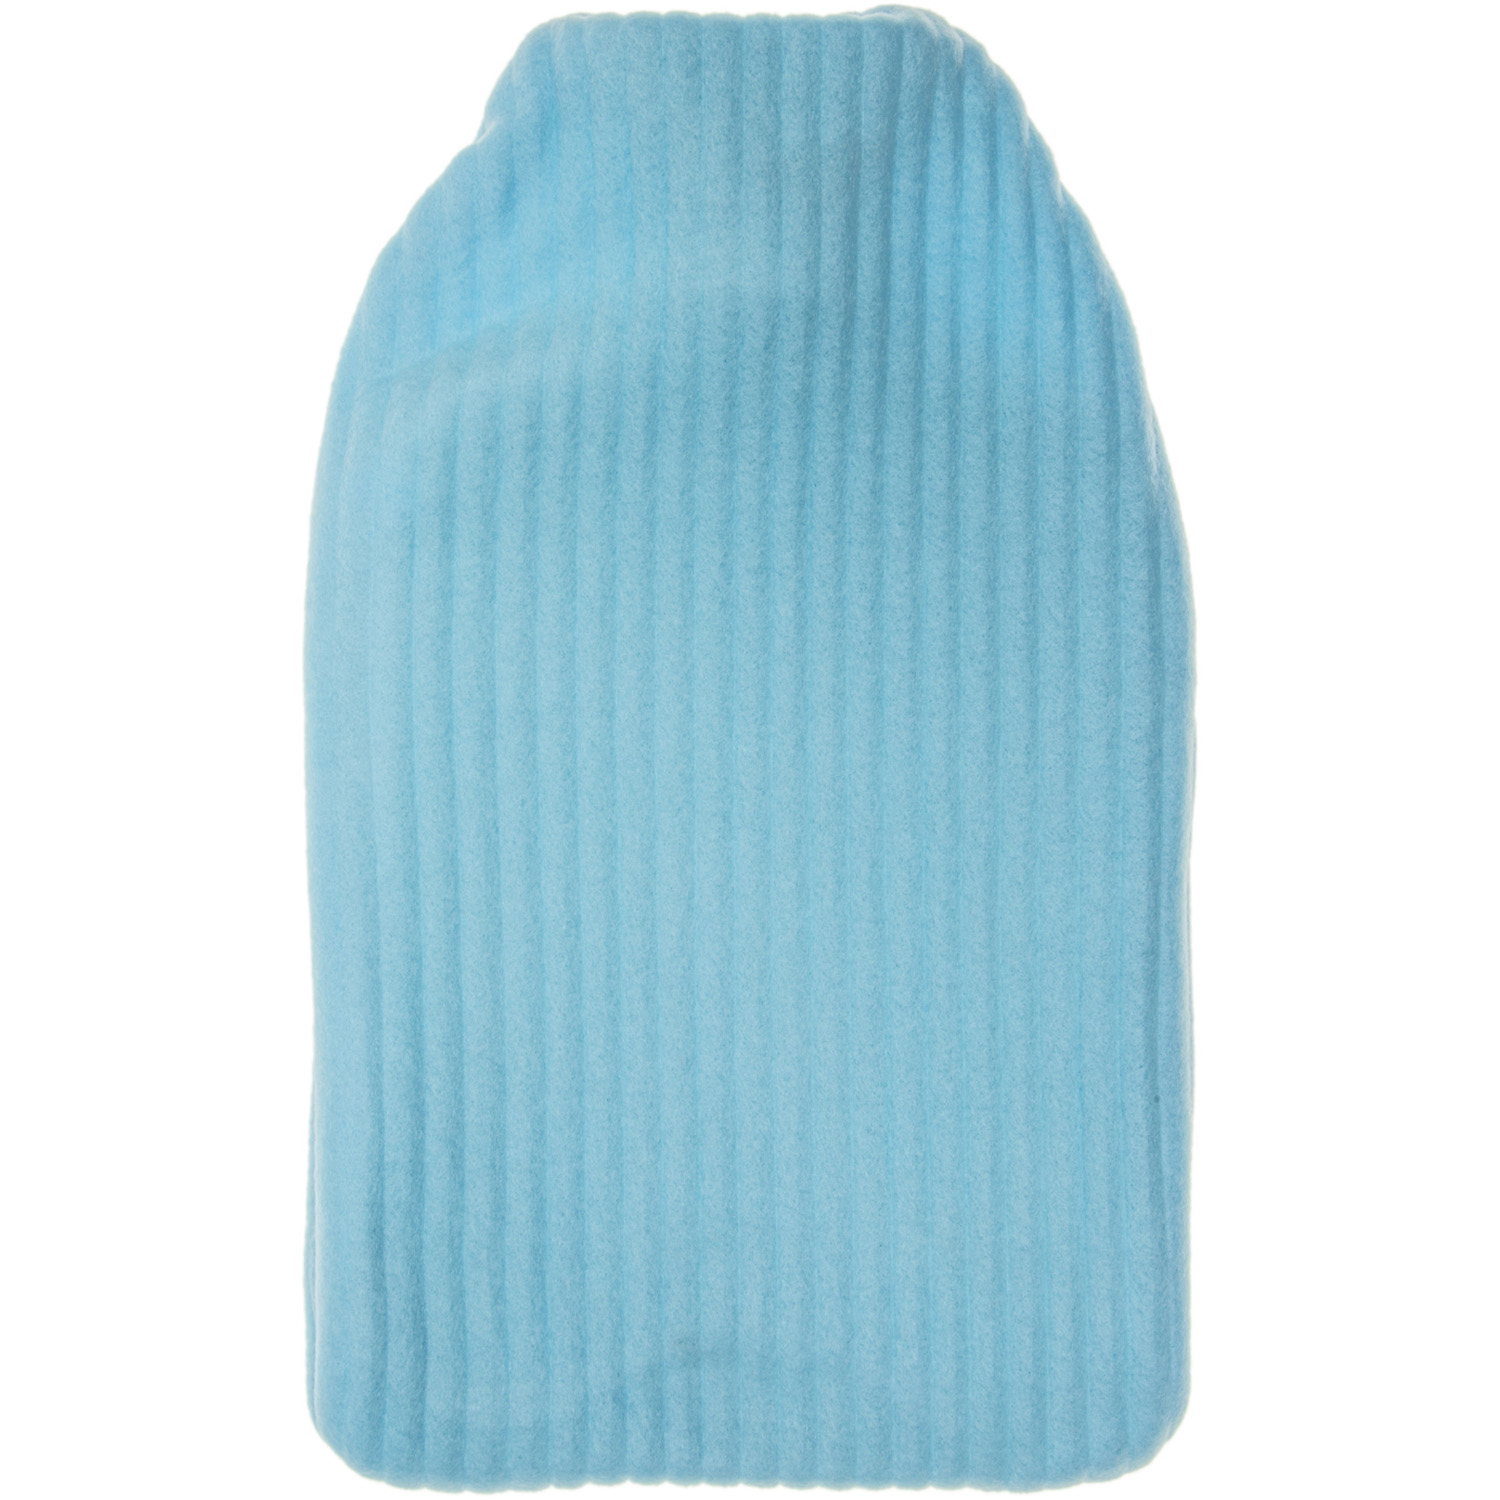 Highight Products Fleece Covered Hot Water Bottle Image